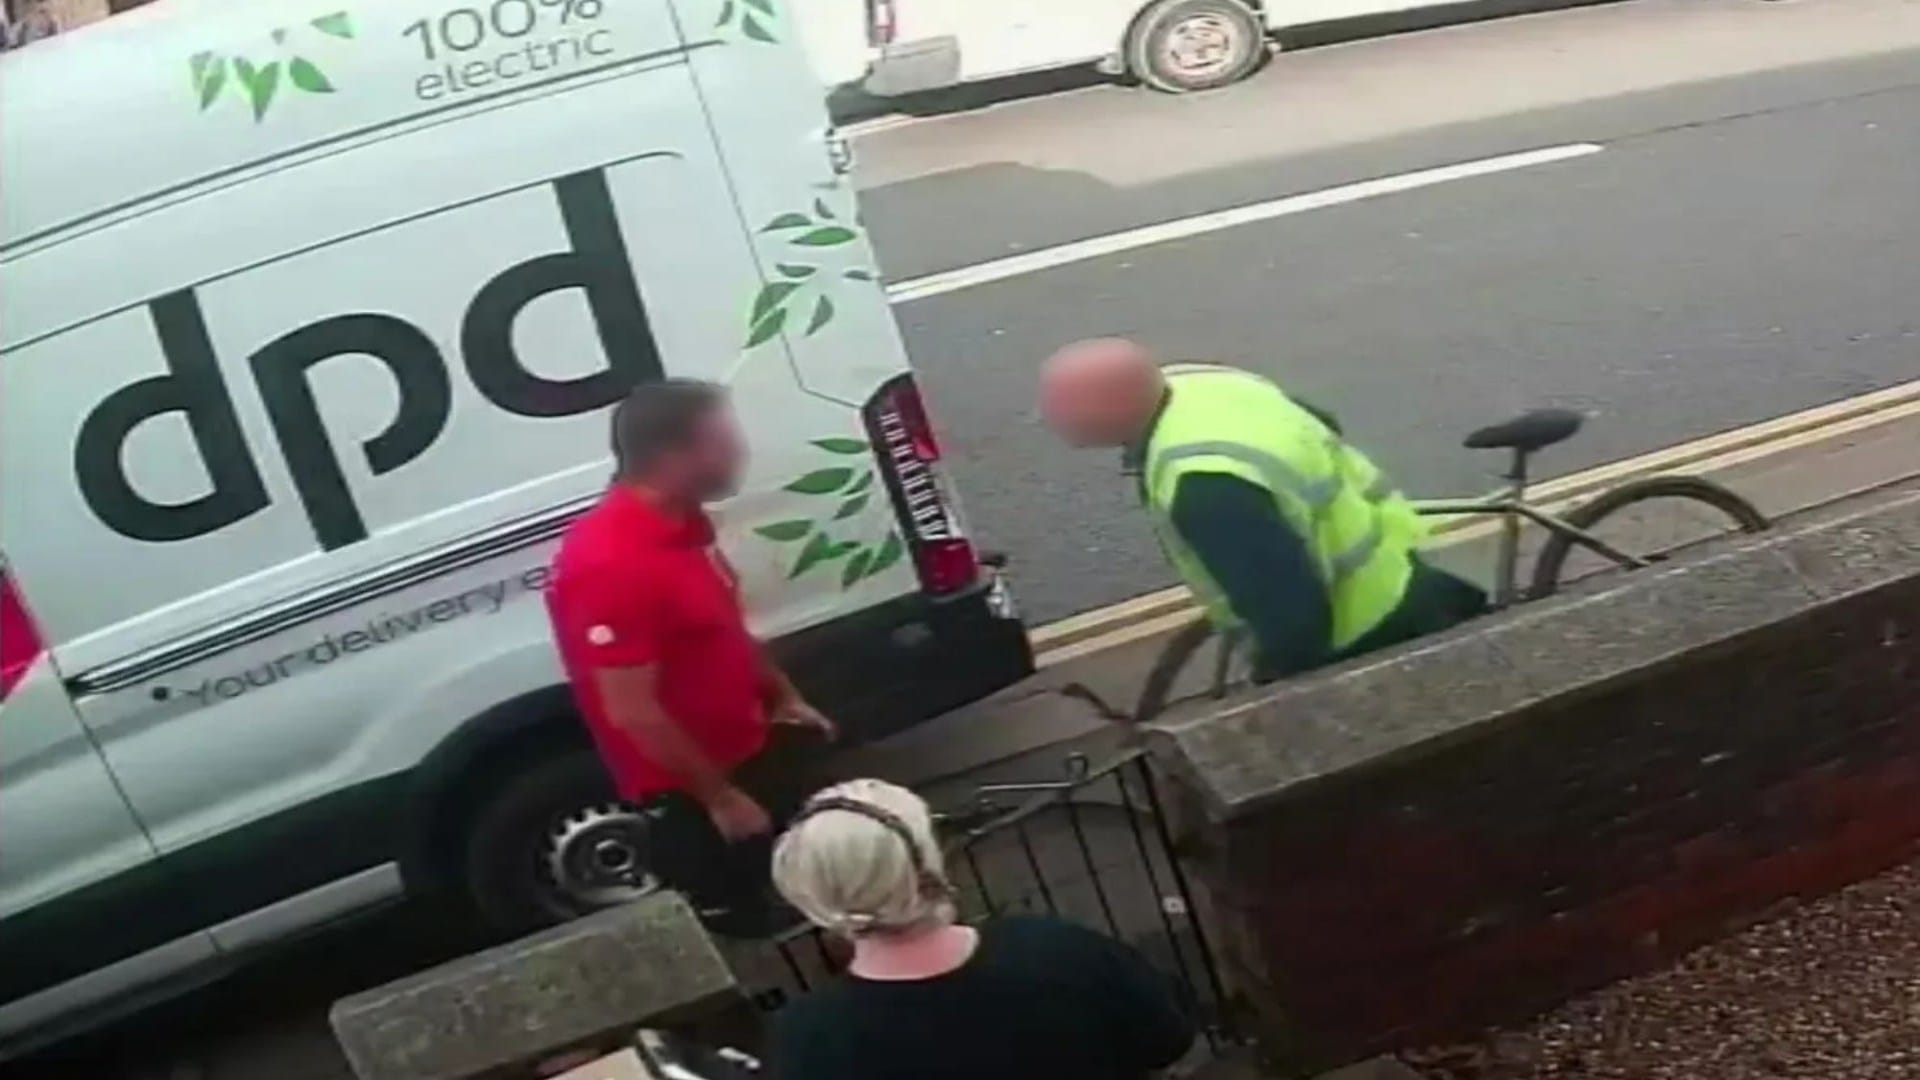 Shocking moment furious cyclist confronts DPD driver for parking on the pavement -but gets instant ‘karma’ moments later